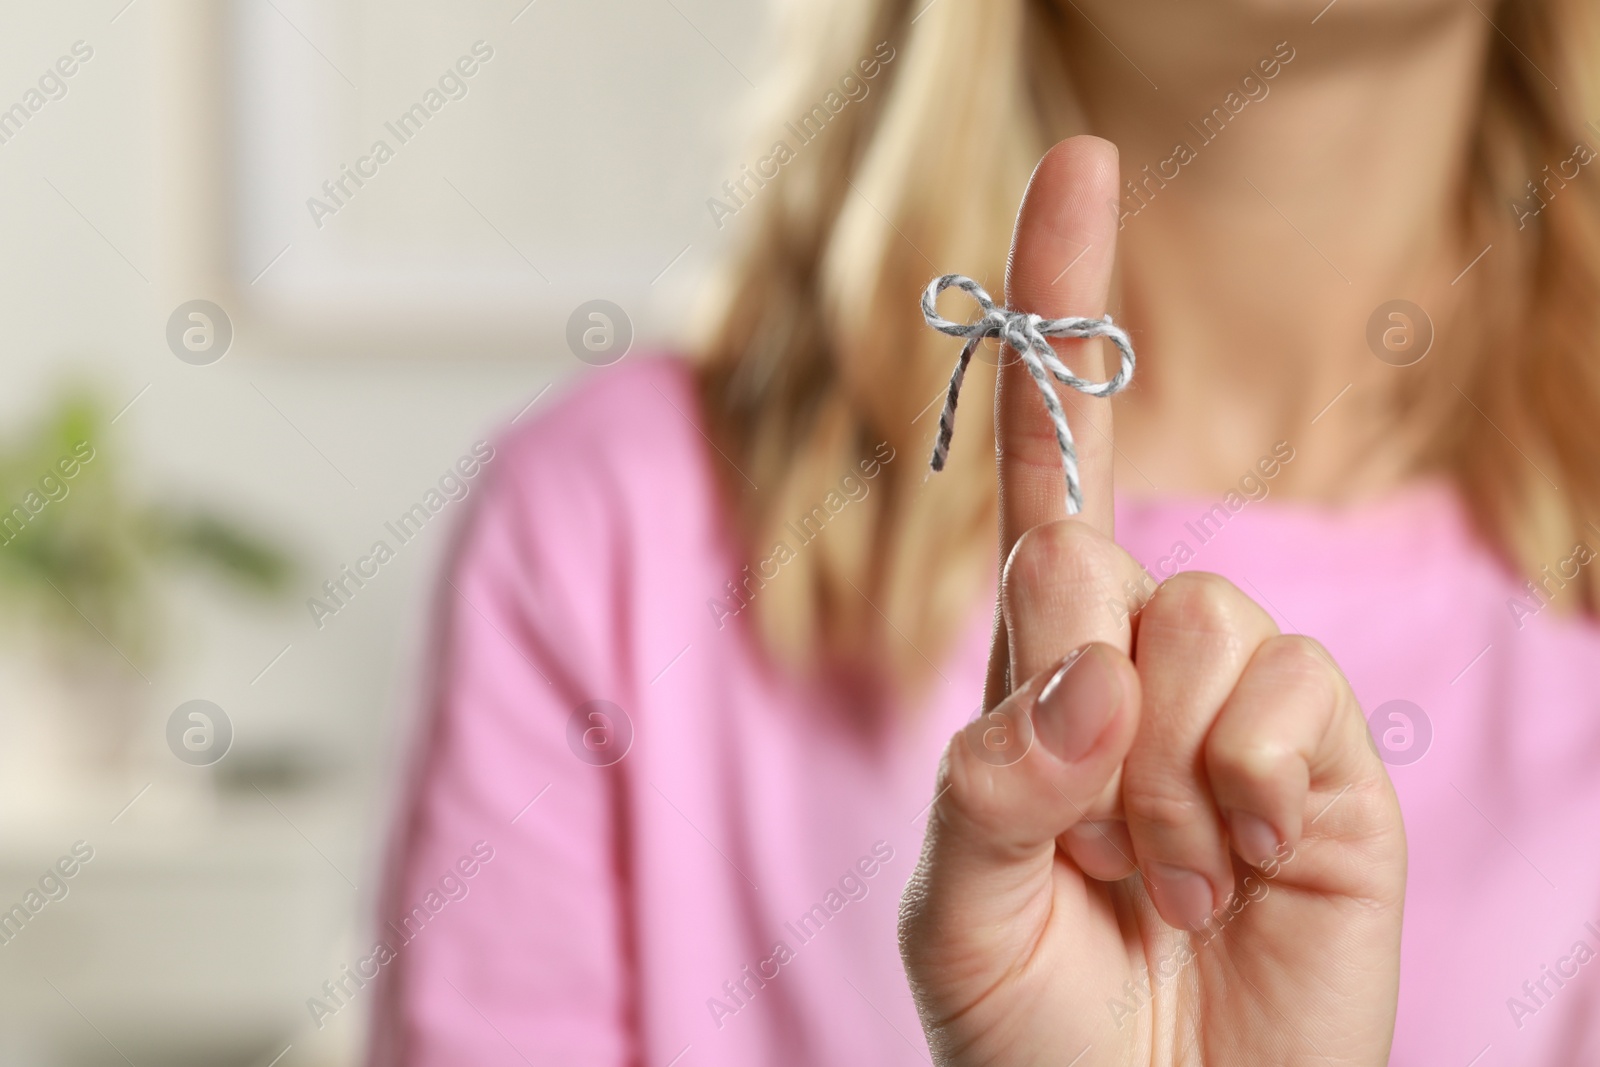 Photo of Woman showing index finger with tied bow as reminder against blurred background, focus on hand